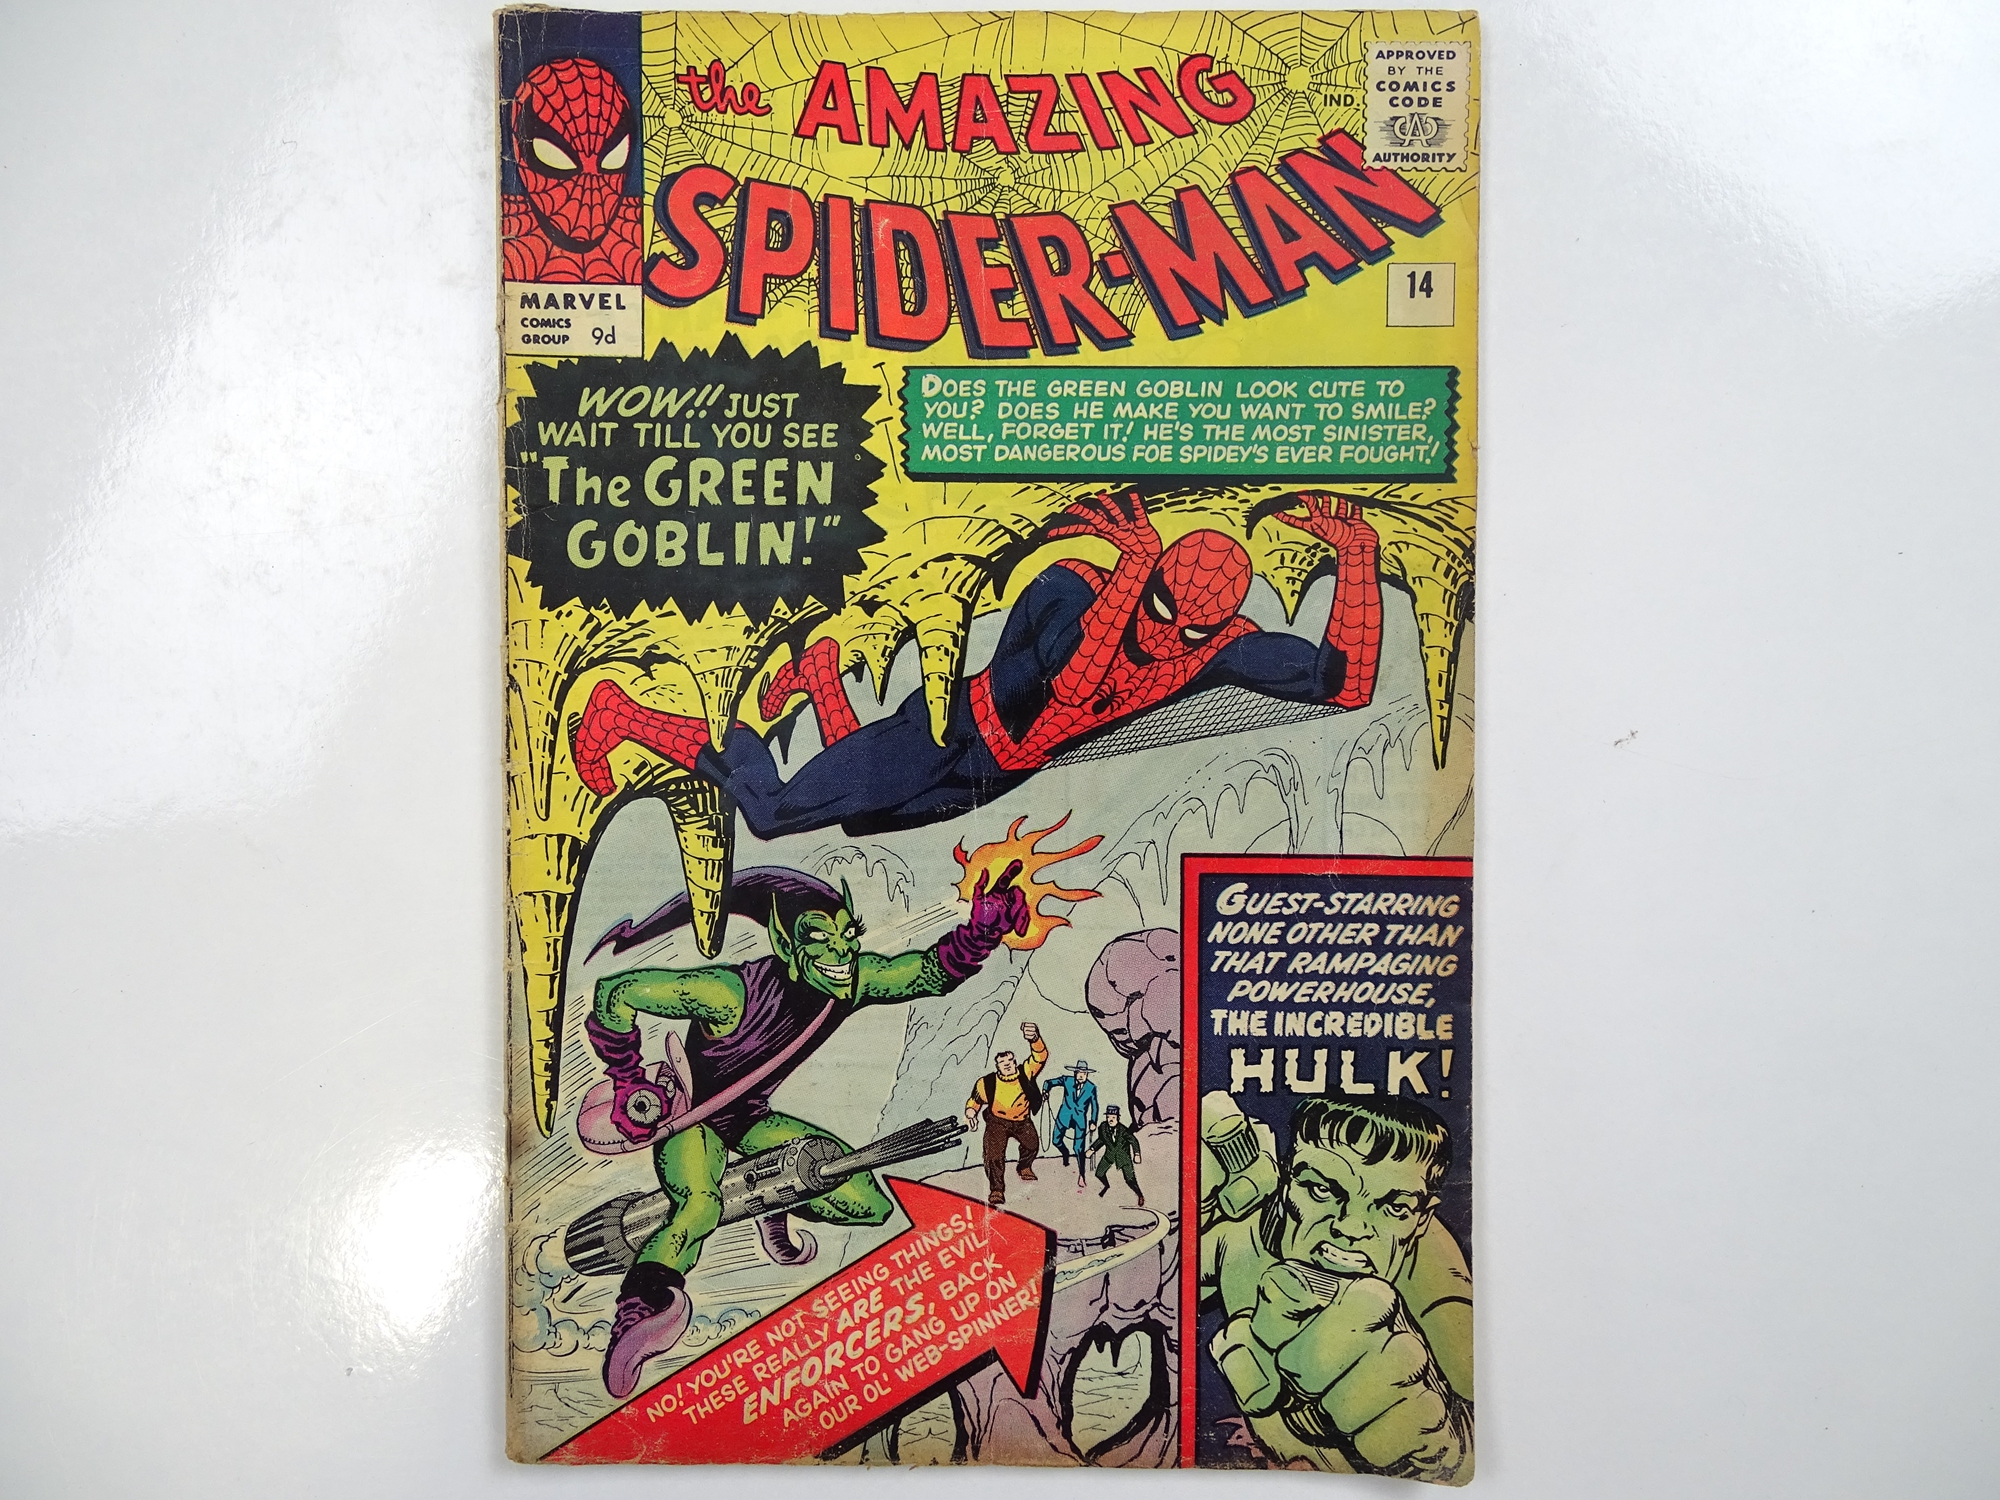 AMAZING SPIDER-MAN #14 - (1964 - MARVEL - UK Price Variant) - First appearance of Green Goblin +